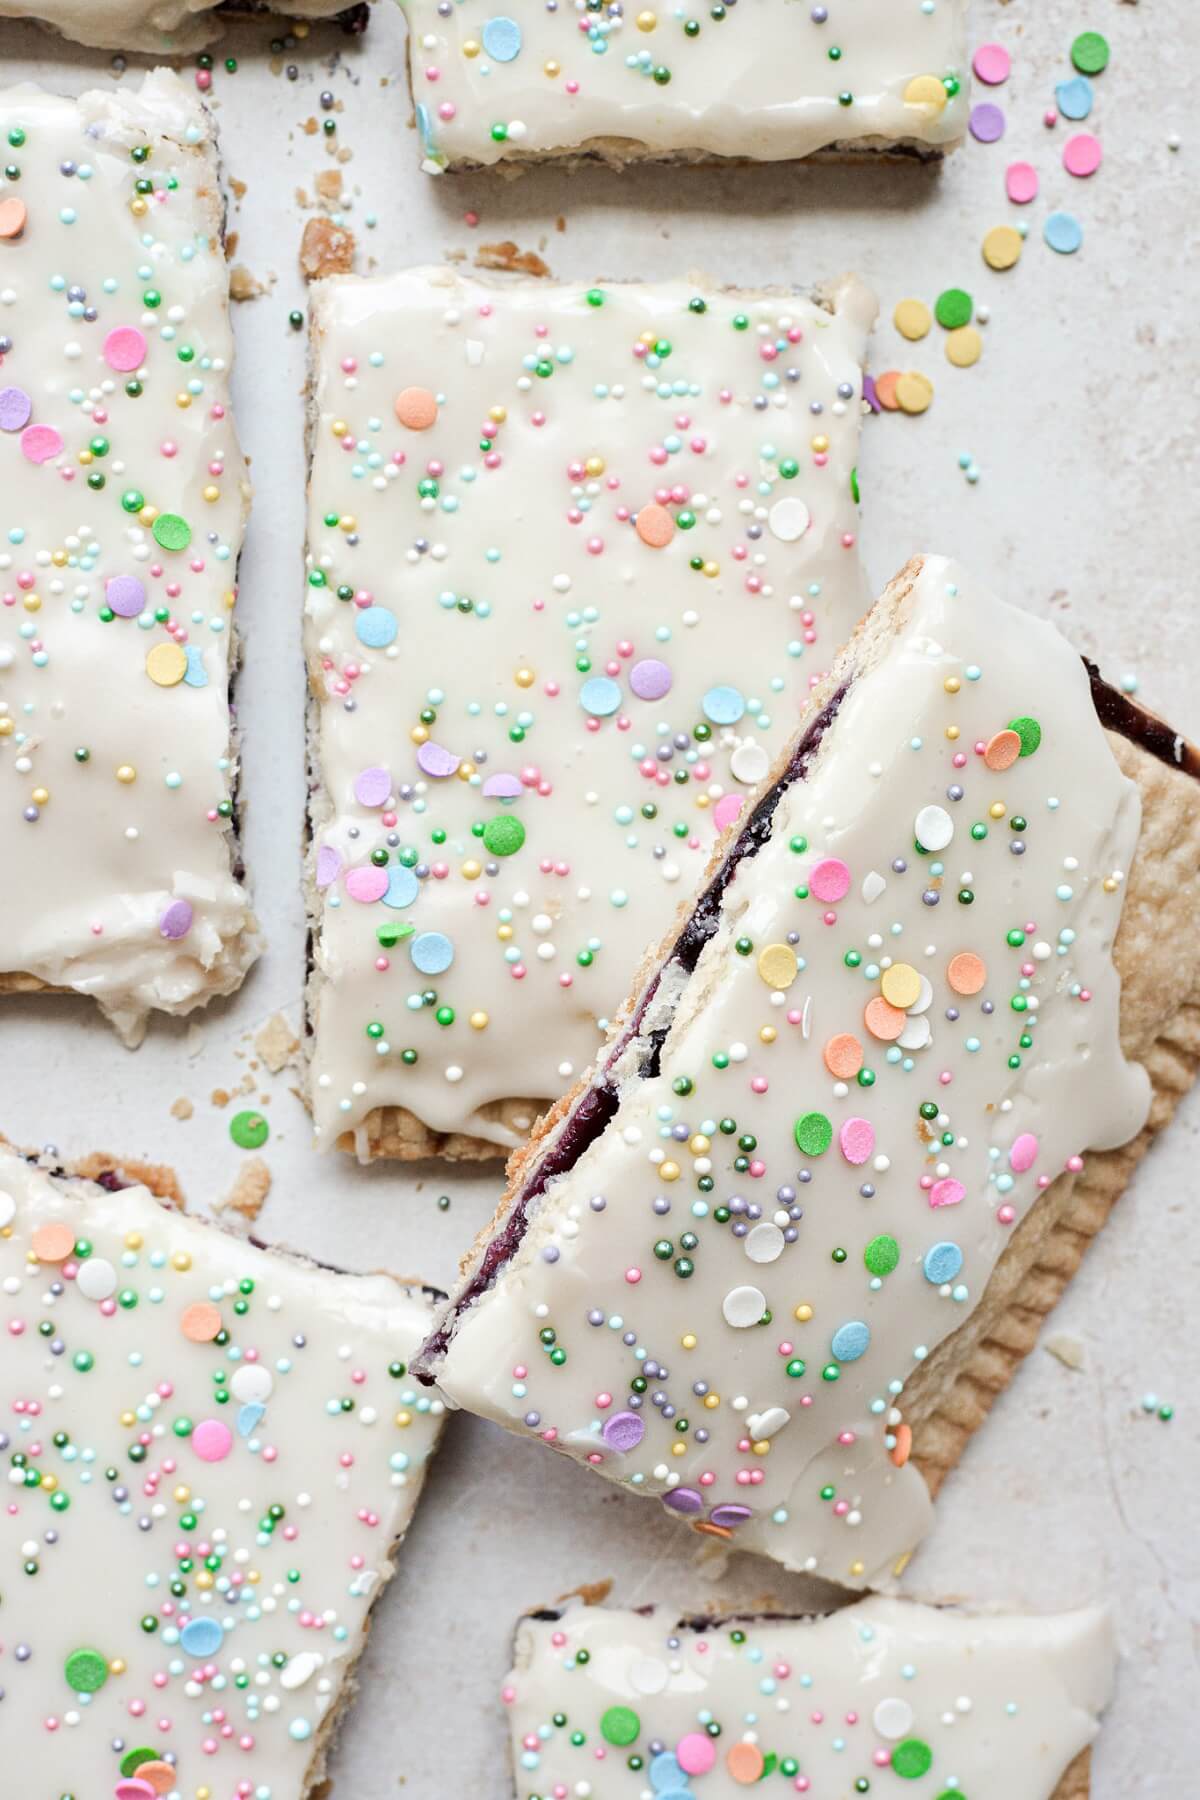 Blueberry pop tarts with icing and sprinkles.